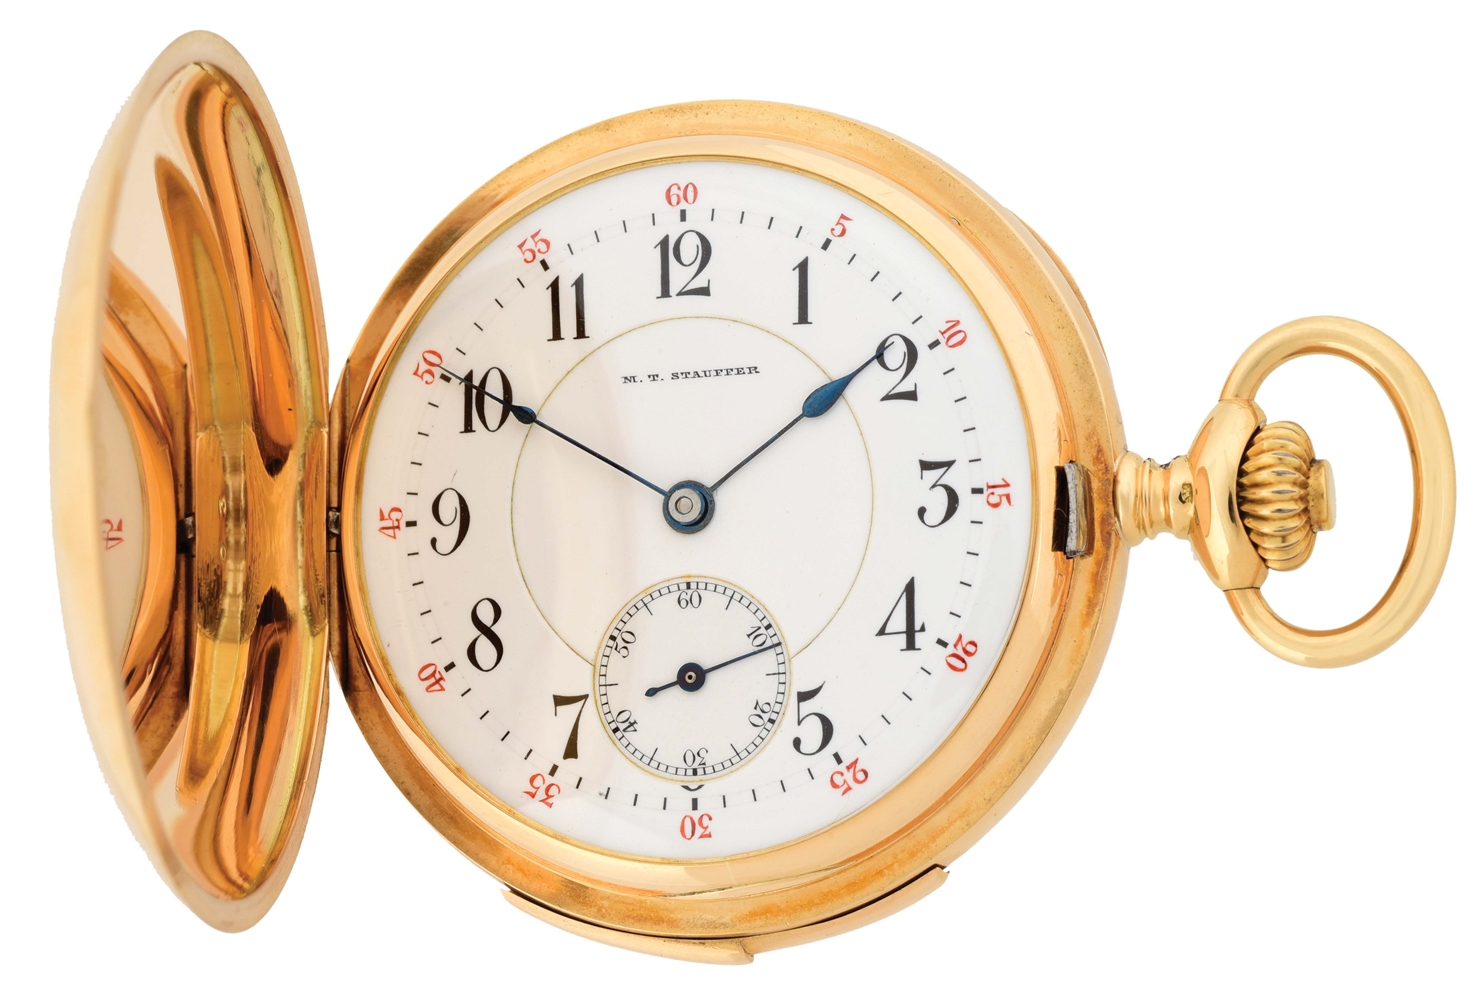 18K GOLD M.T. STAUFFER, LES PONDS, MINUTE REPEATING H/C POCKET WATCH. 